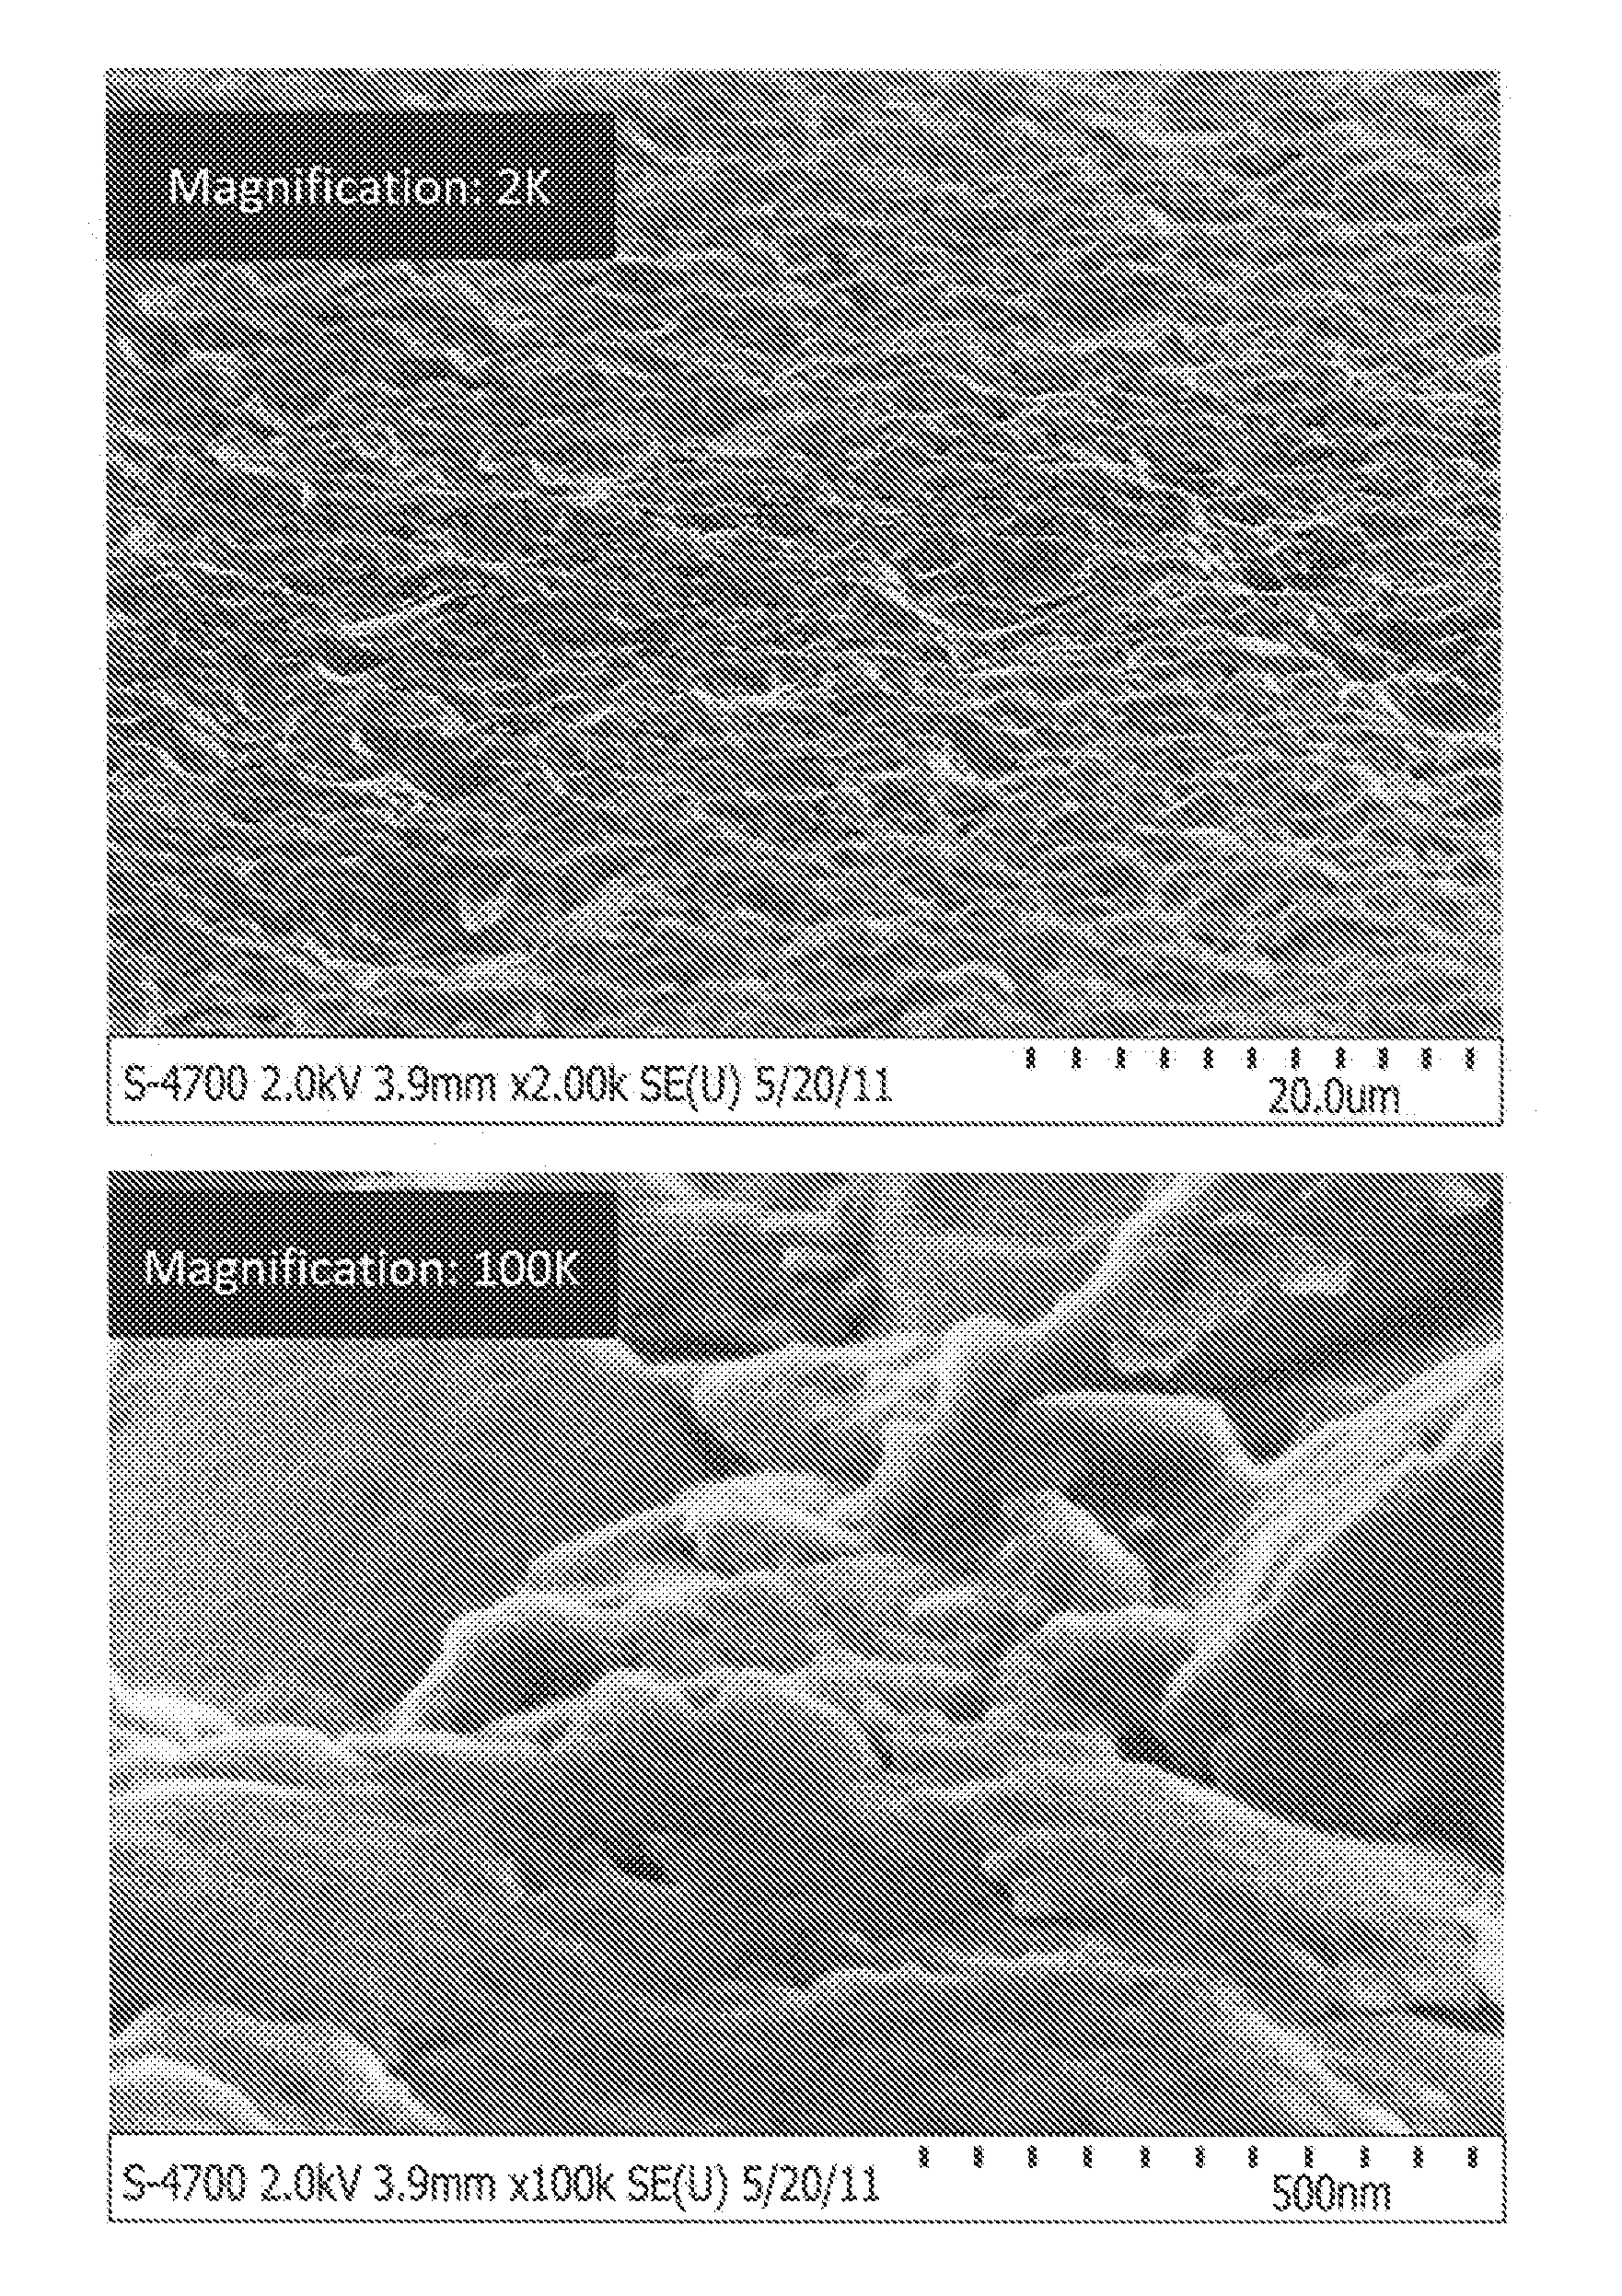 Compositions and Methods for Texturing of Silicon Wafers